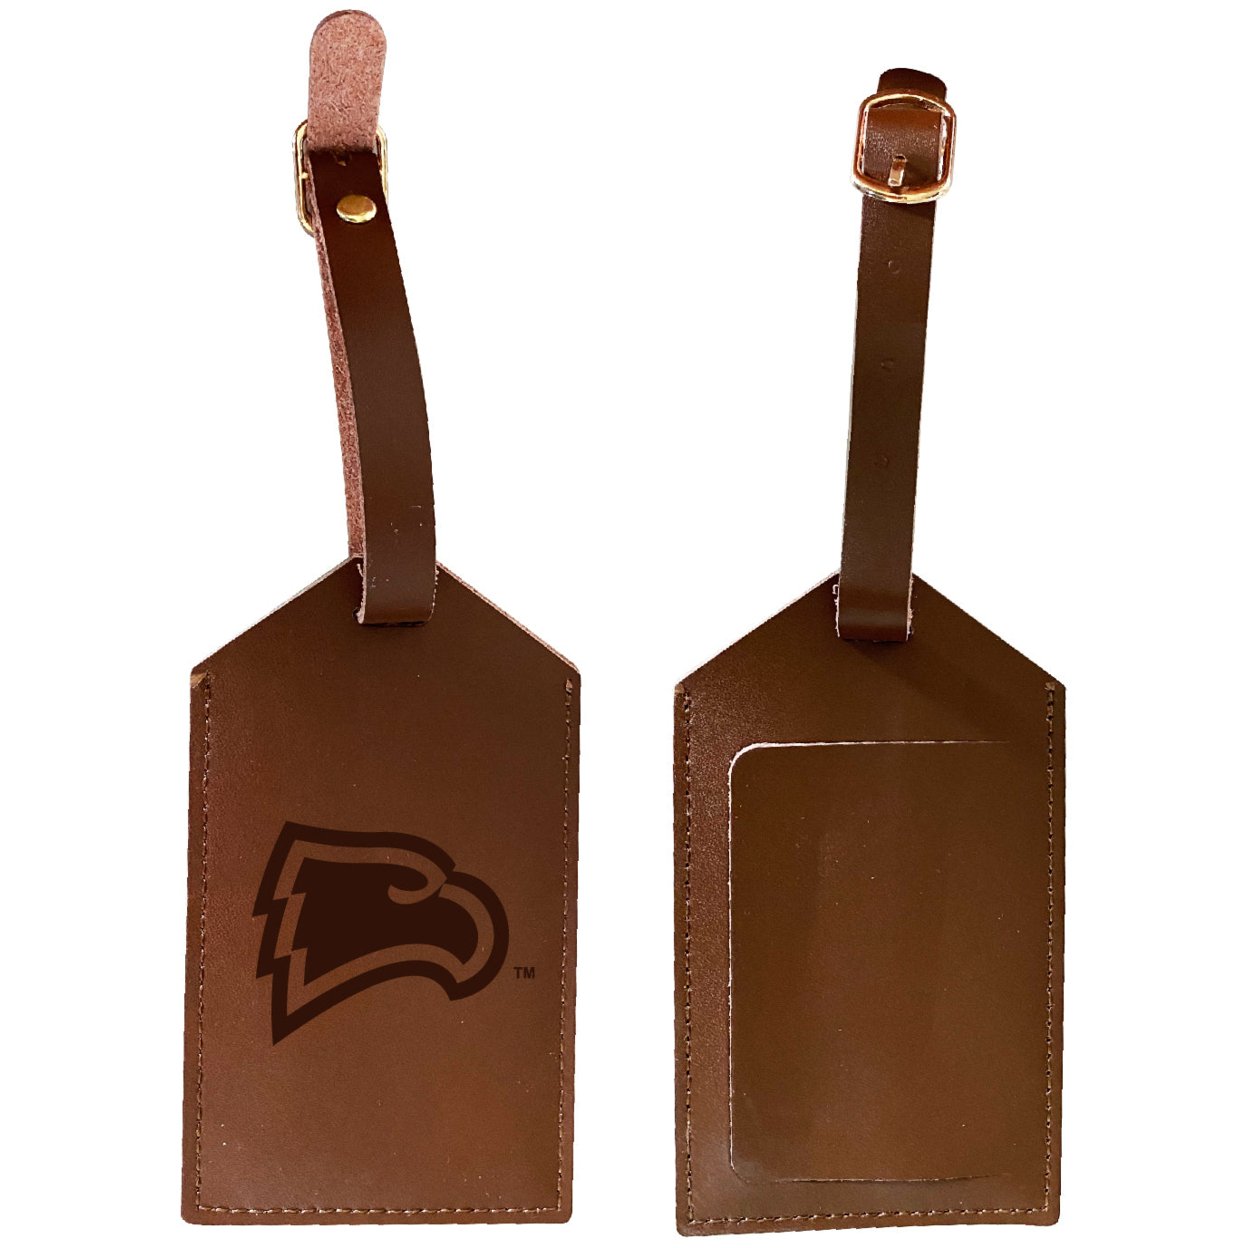 Winthrop University Leather Luggage Tag Engraved